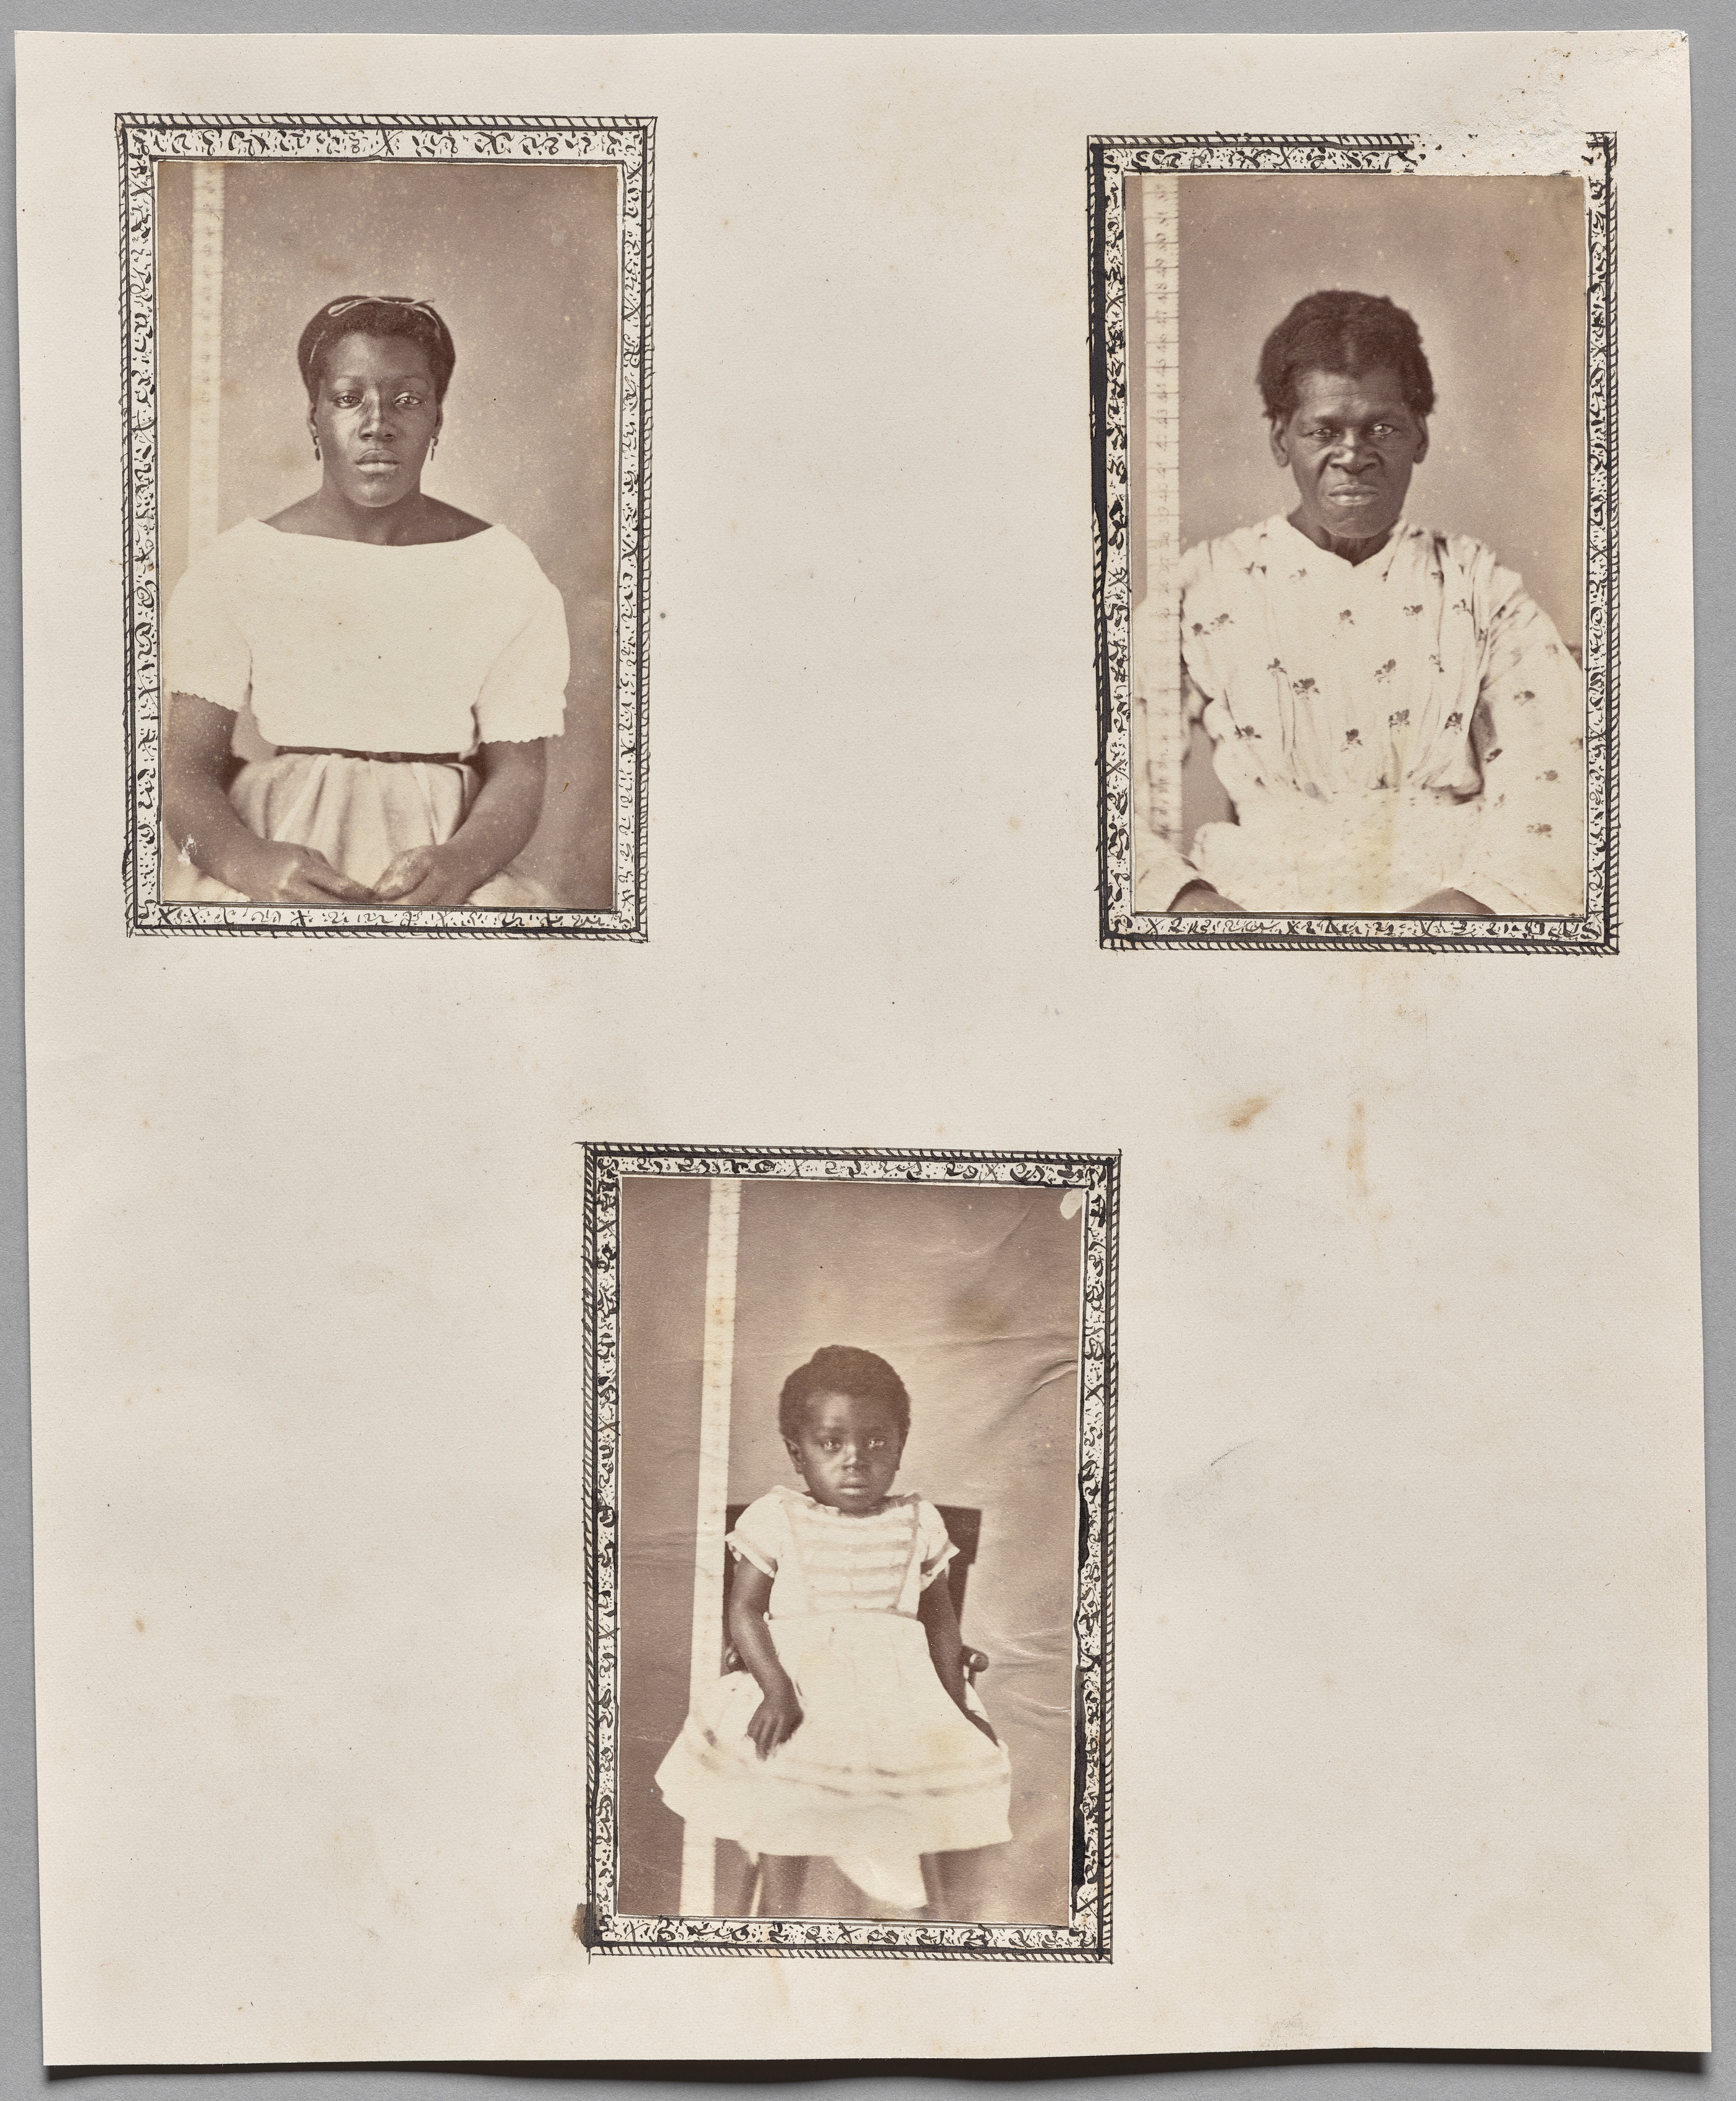 Untitled (West Indian Women Being Measured)